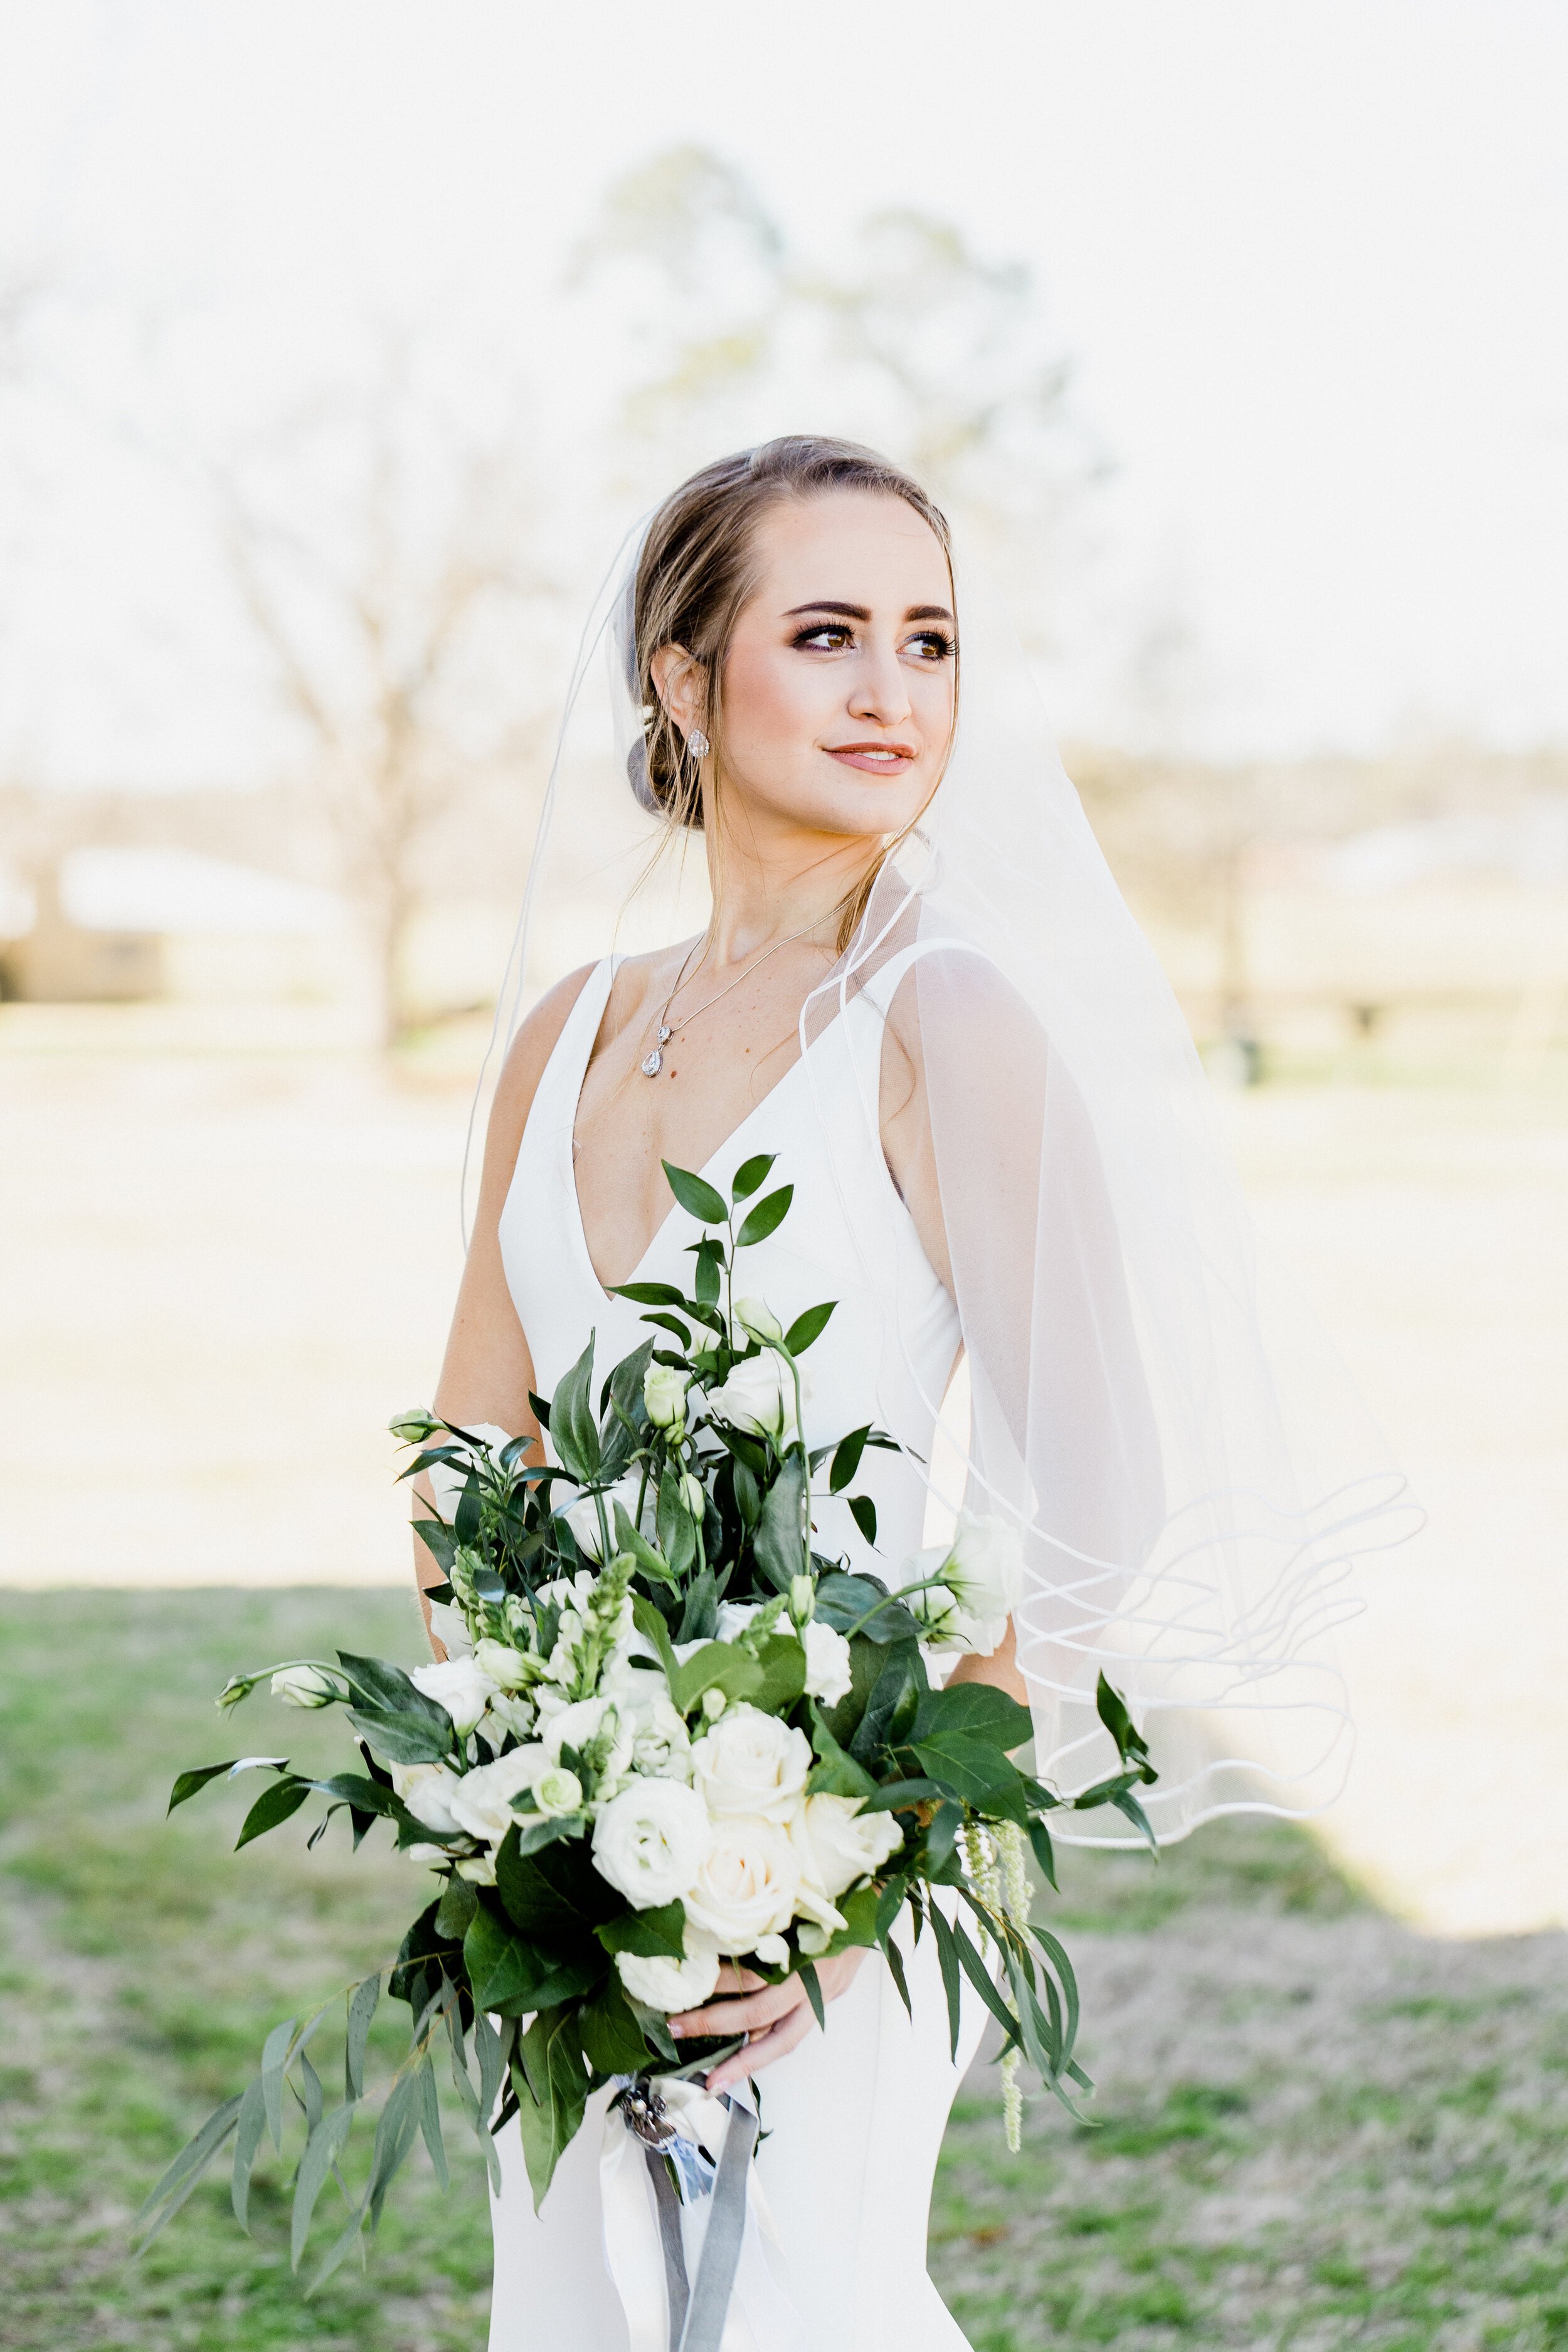 ivory-and-beau-bride-bailey-down-for-the-gown-blog-wedding-blog-bridal-blog-real-bride-in-archie-by-made-with-love-wedding-dress-crepe-bridal-gown-fitted-sleek-smooth-simple-modern-wedding-gown-bridal-shop-bridal-boutique-savannah-georgia-Portrait-205.jpg